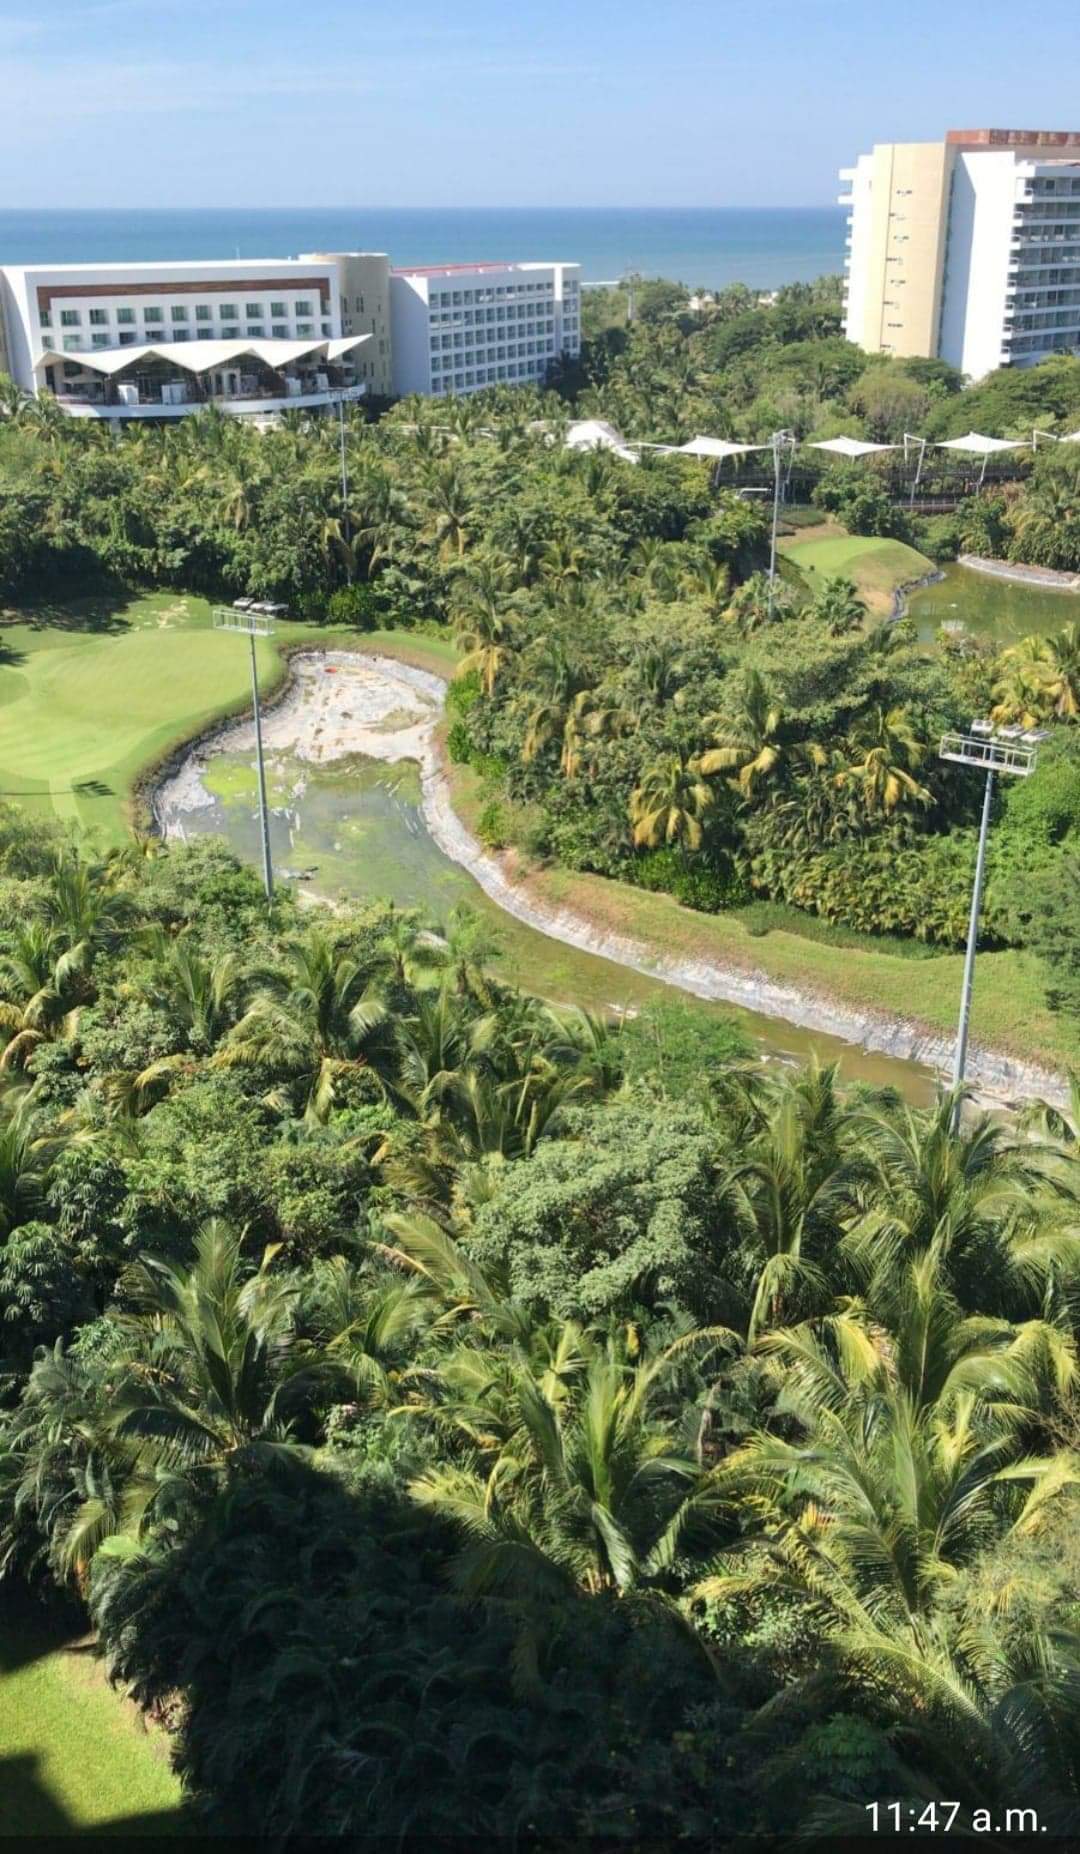 This photo update from Dale in Nuevo Vallarta shows areas of Vidanta Nayarit that are under construction. BeachLand for Estates owners, lagoons, and the Lakes Course...all under repair. Finish one portiong by January 30, 2020? Stay tuned... - Subscribers View - 11/15/20